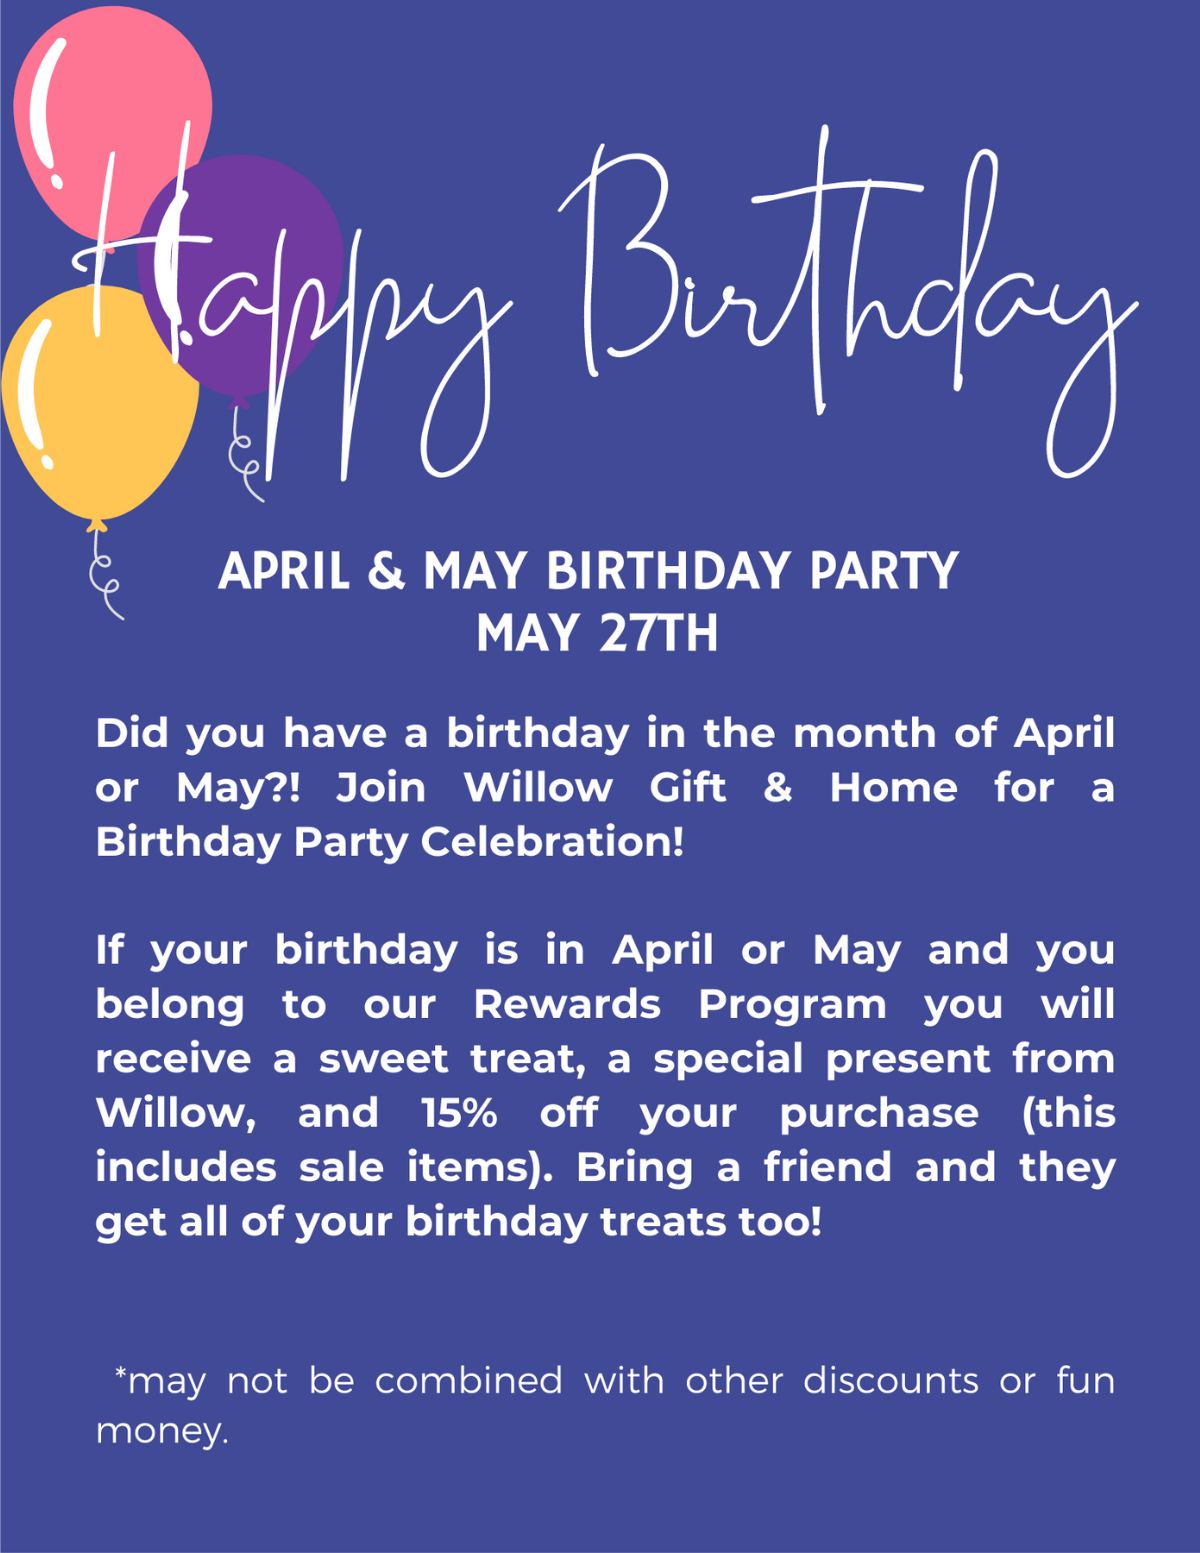 Happy Birthday! Celebrate April and May birthdays with is this weekend